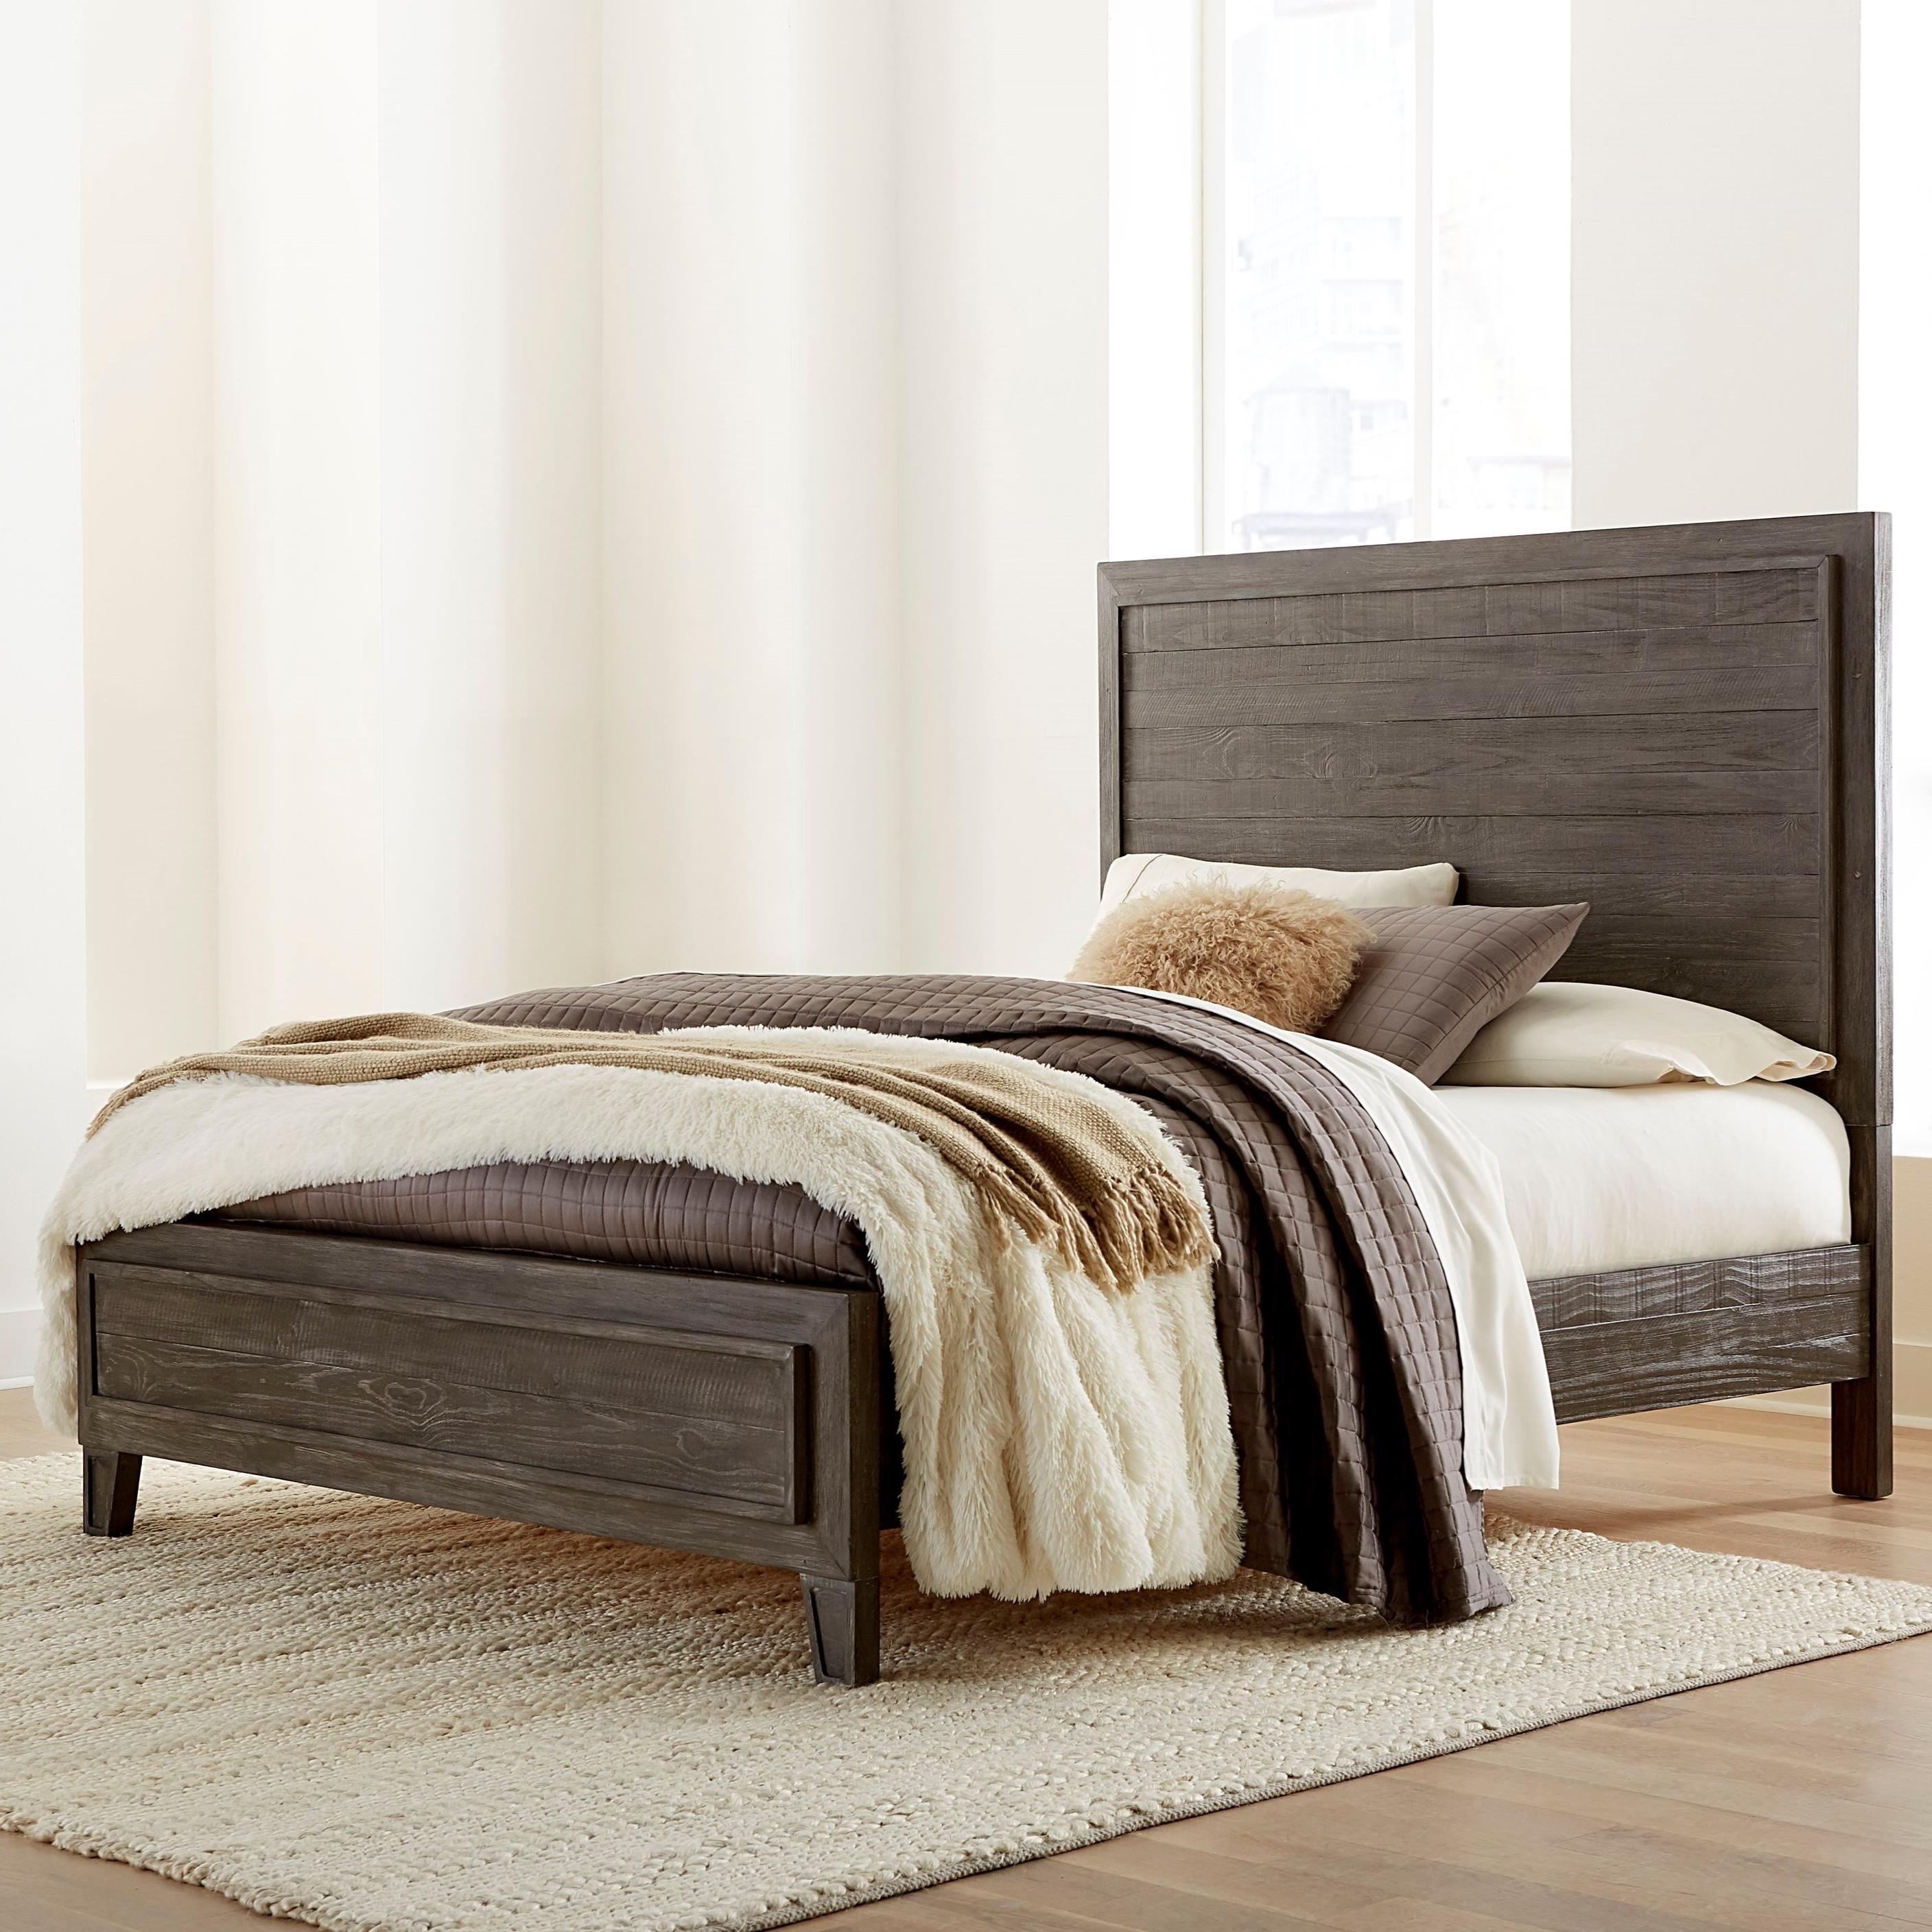 Casual, Rustic Panel Bed HADLEY A4H6A6v in Onyx 